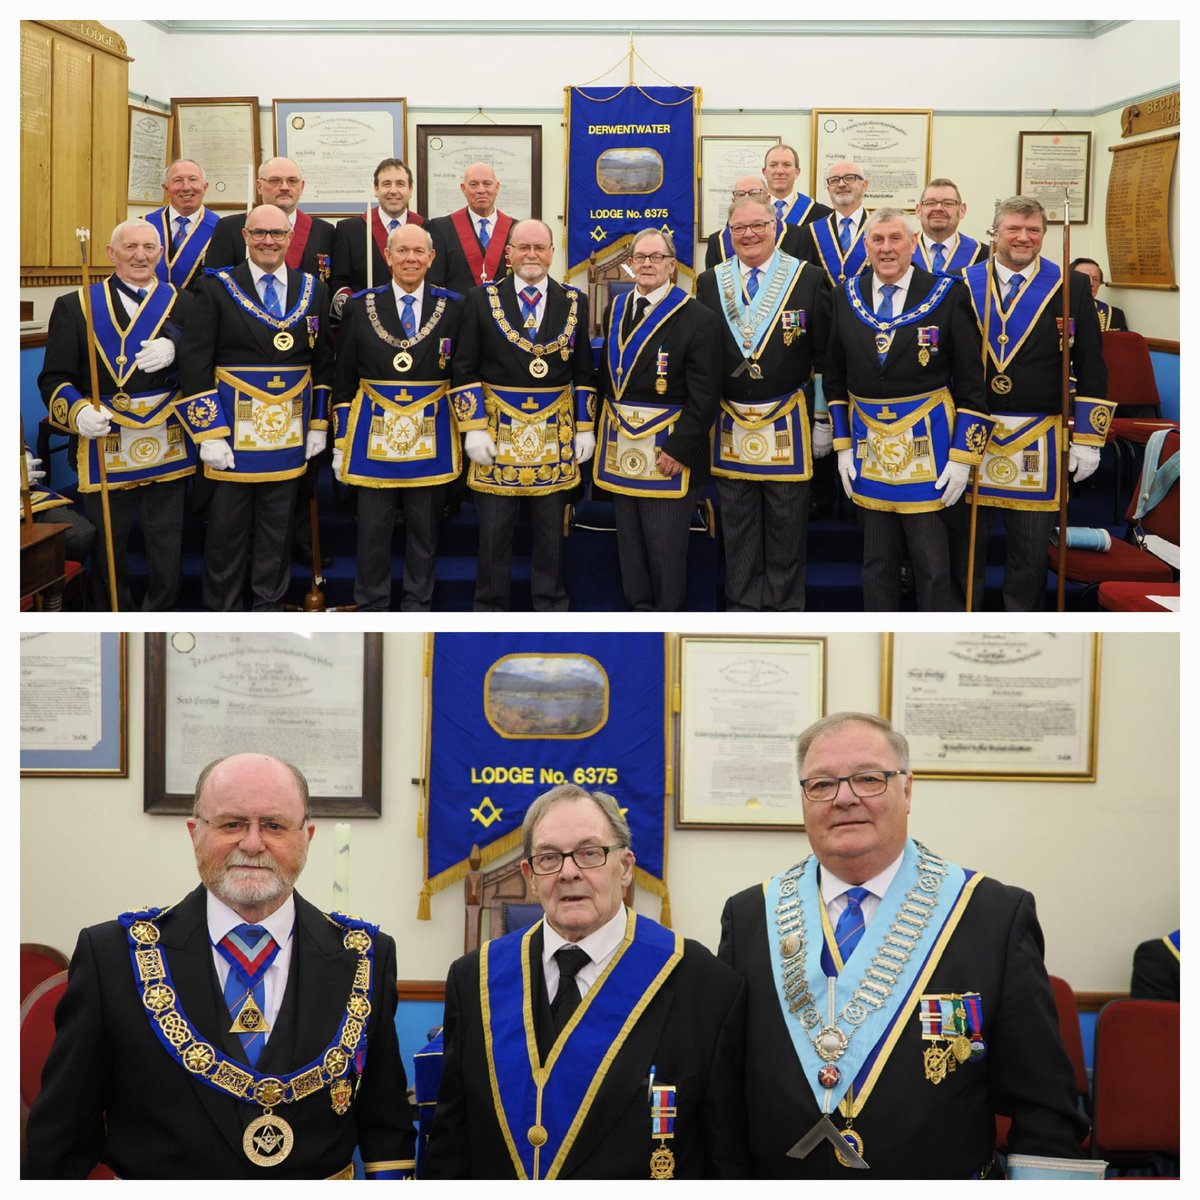 Wonderful evening @ Derwentwater lodge to celebrate WBro. Neville Parry 60 year membership of our fantastic order
Full Provincial team in attendance 
A pack lodge room
A sincere presentation by the PGM 
Brilliant festive board 
A fitting occasion for a great man & Mason 🎼🎵🎶🎼